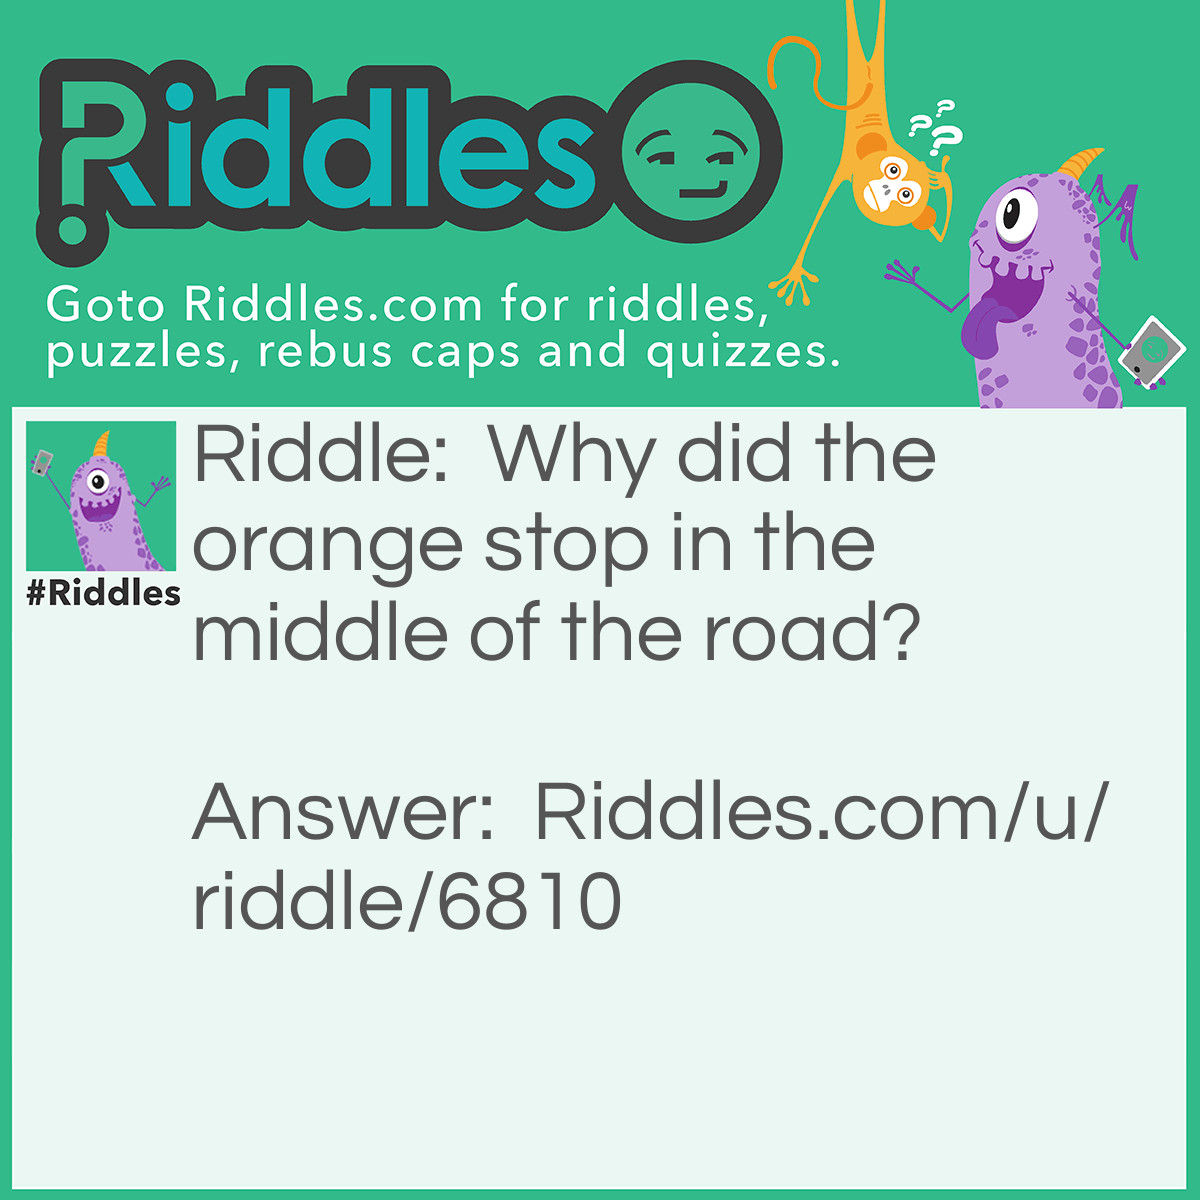 Riddle: Why did the orange stop in the middle of the road? Answer: Because it ran out of Juice.